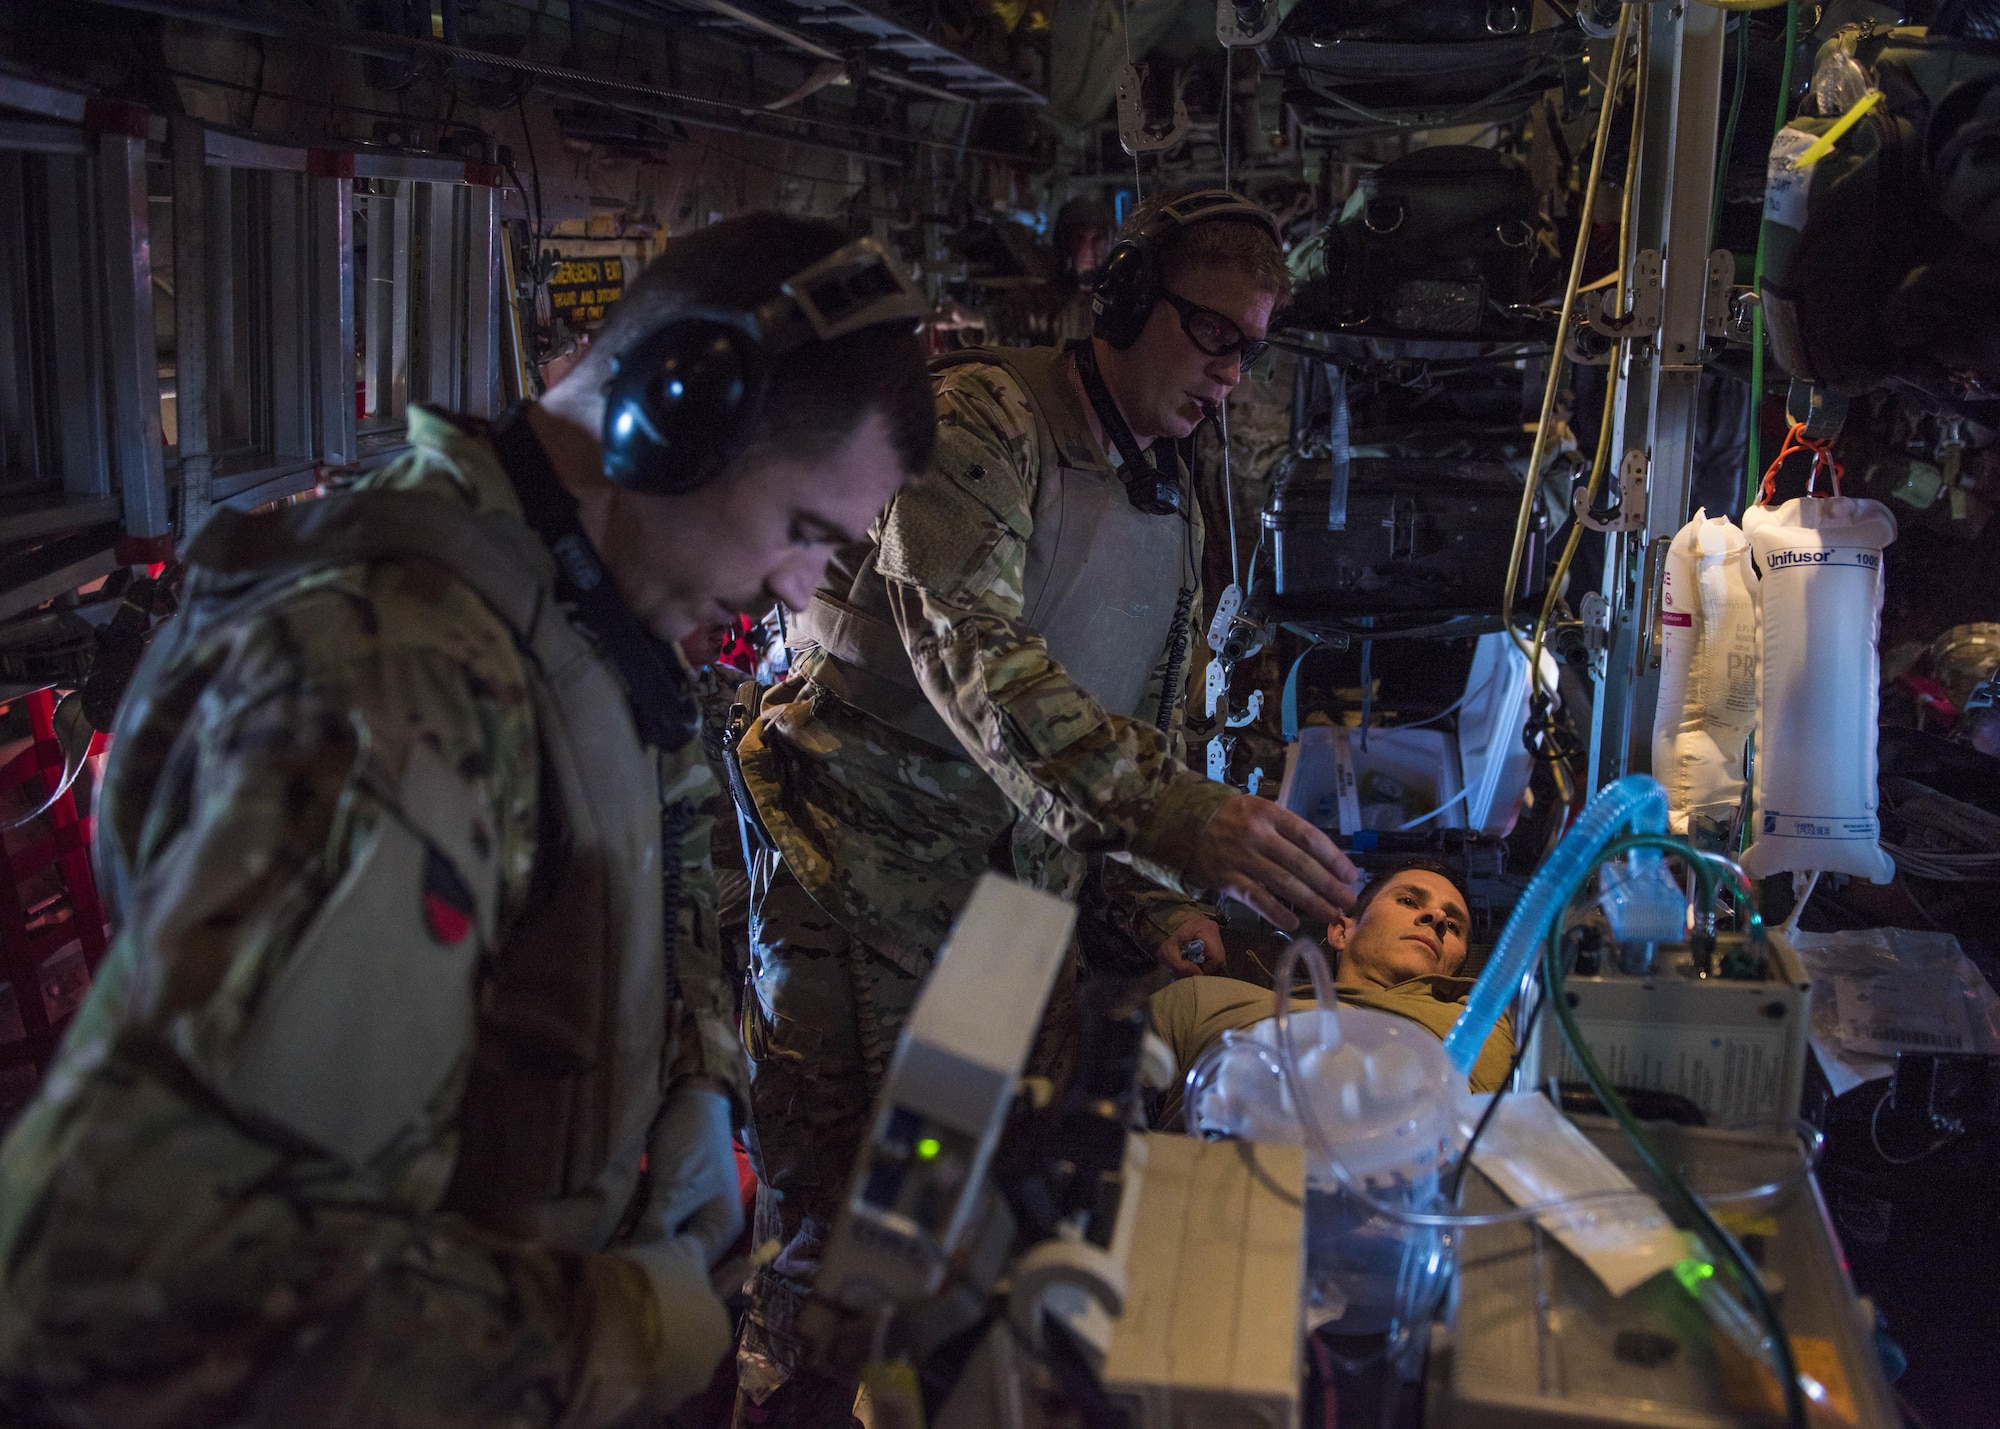 Capt. Antonio Stone (left), 455th Expeditionary Aeromedical Evacuation Critical Care Air Transport Team nurse, and Maj. Johnathan Henderson (right), 455th EAES CCATT doctor, puts in a chest tube for a simulated wounded patient, Bagram Airfield, Afghanistan, Sept. 03, 2016. If servicemembers must be moved from the battlefield to a medical facility outside of Afghanistan, the airmen assigned to the 455th EAES will be the link between them getting from the combat zone to higher-level medical care. (U.S. Air Force photo by Senior Airman Justyn M. Freeman)